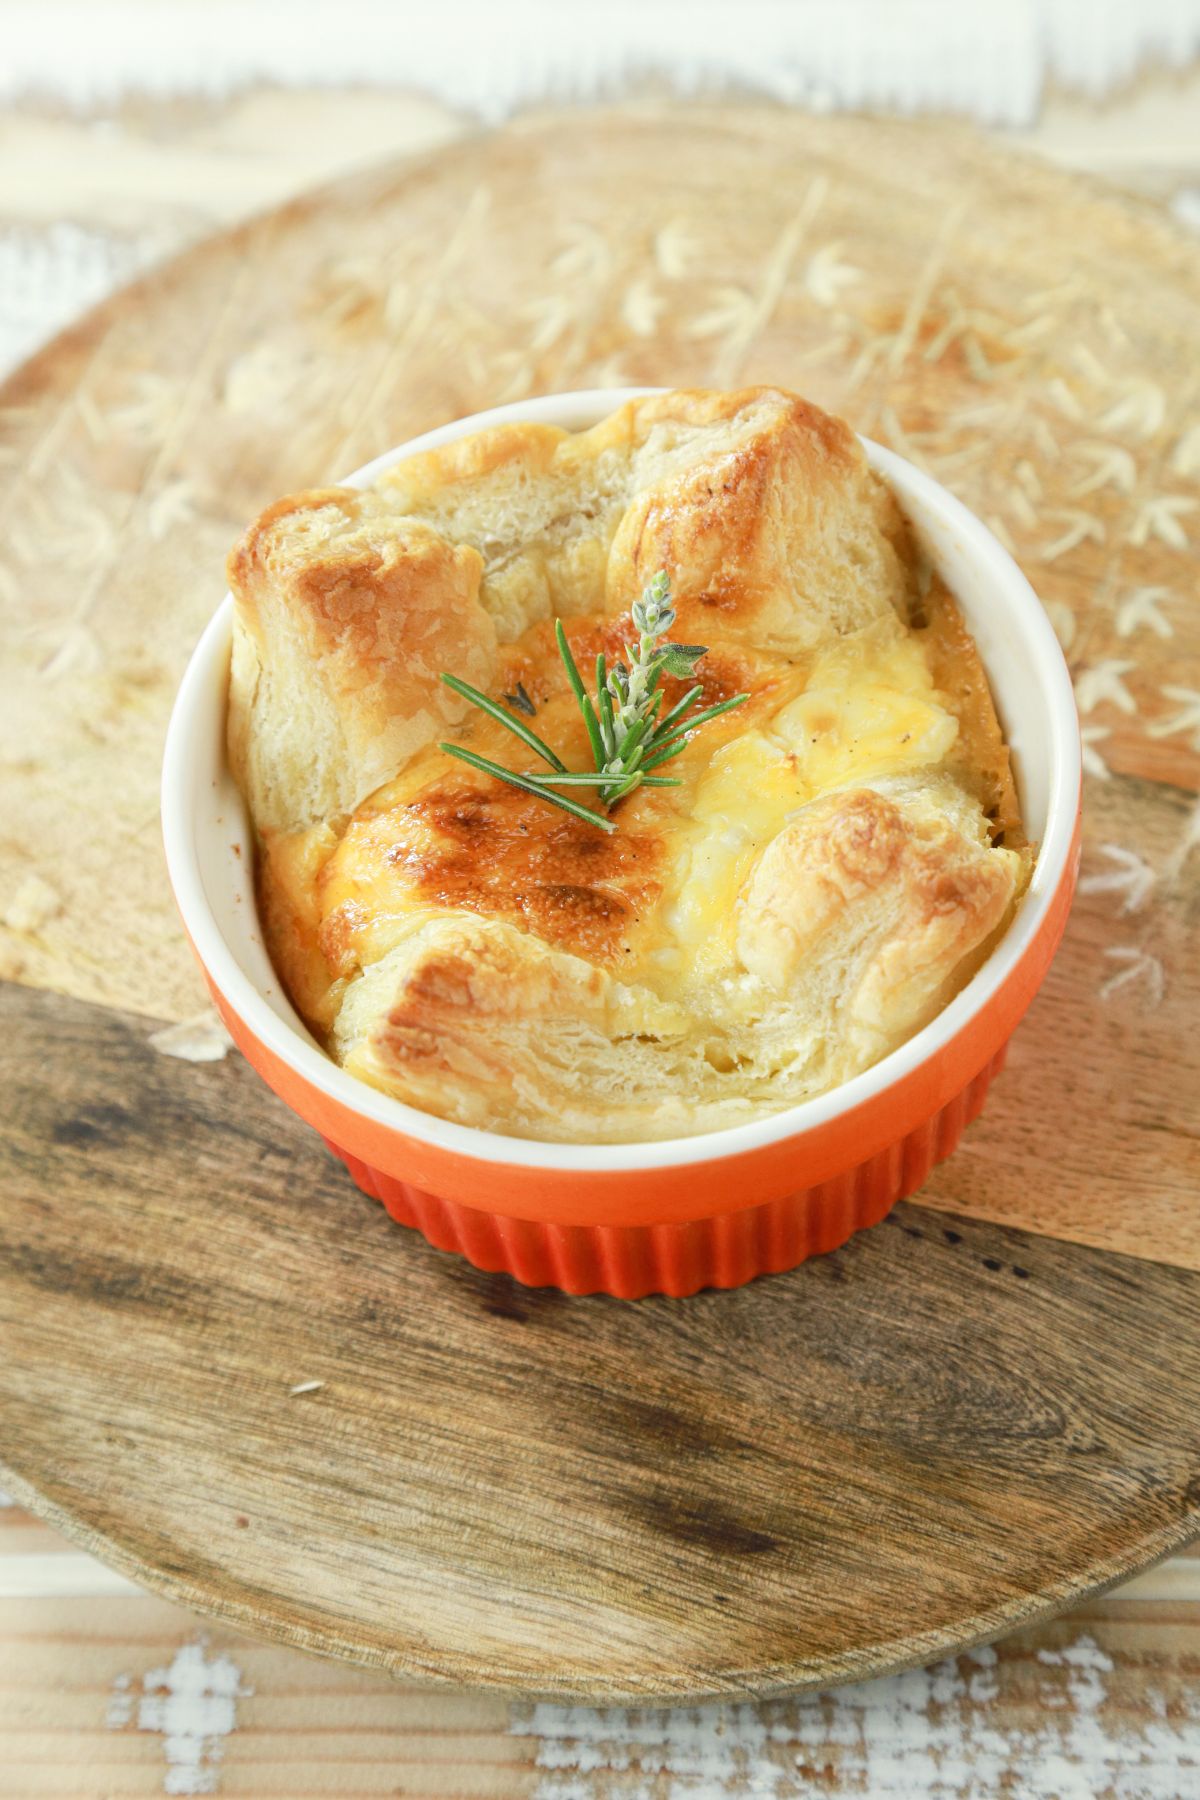 orange ramekin filled with puff pastry quiche on wood table